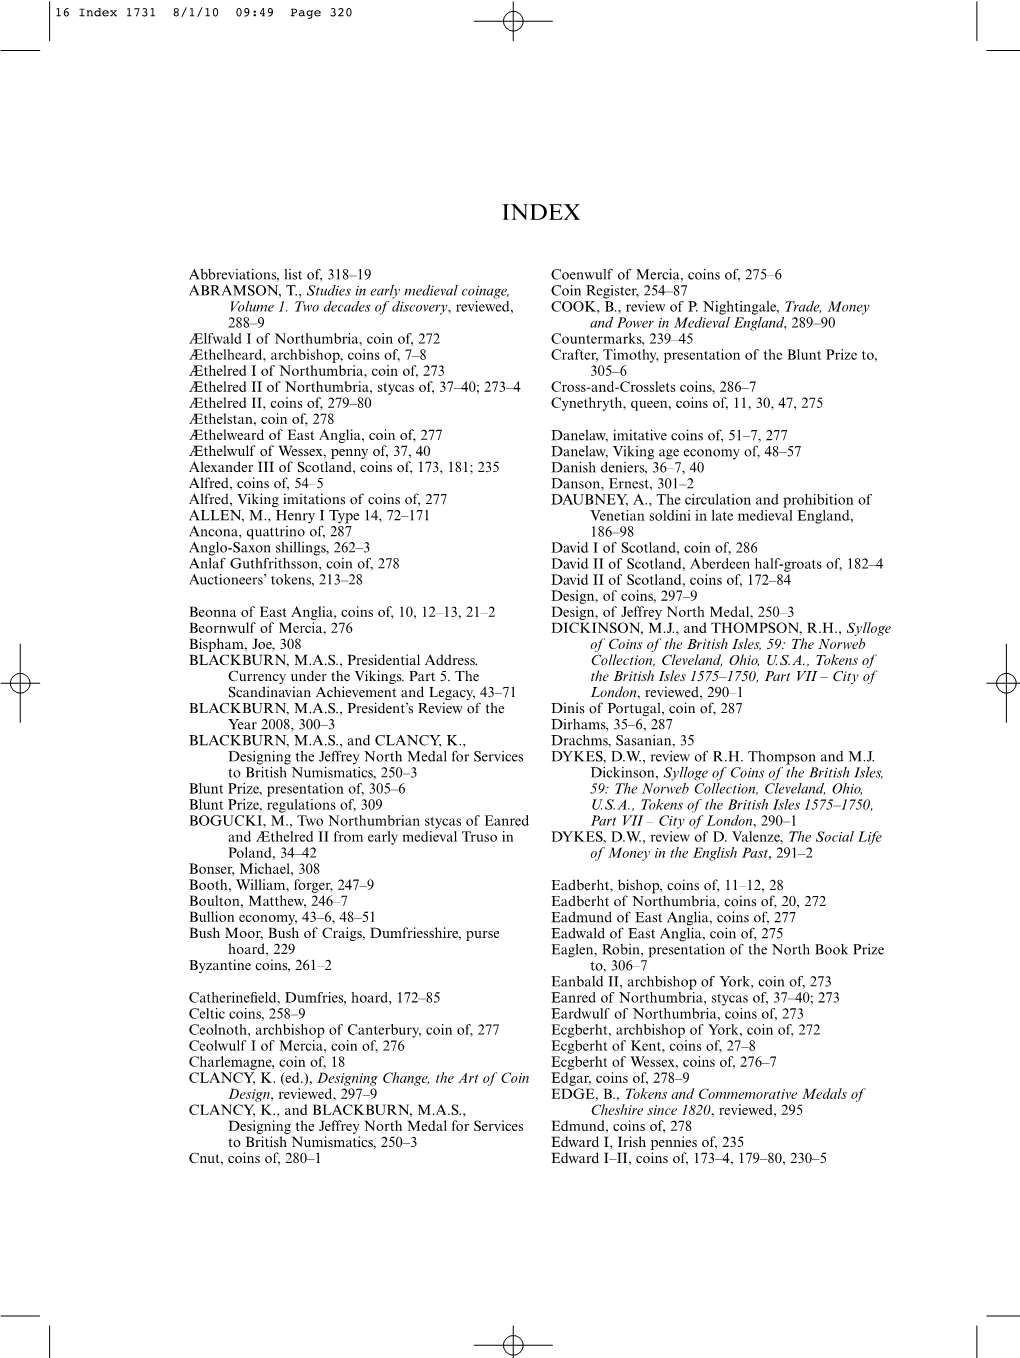 Abbreviations, List Of, 318–19 ABRAMSON, T., Studies in Early